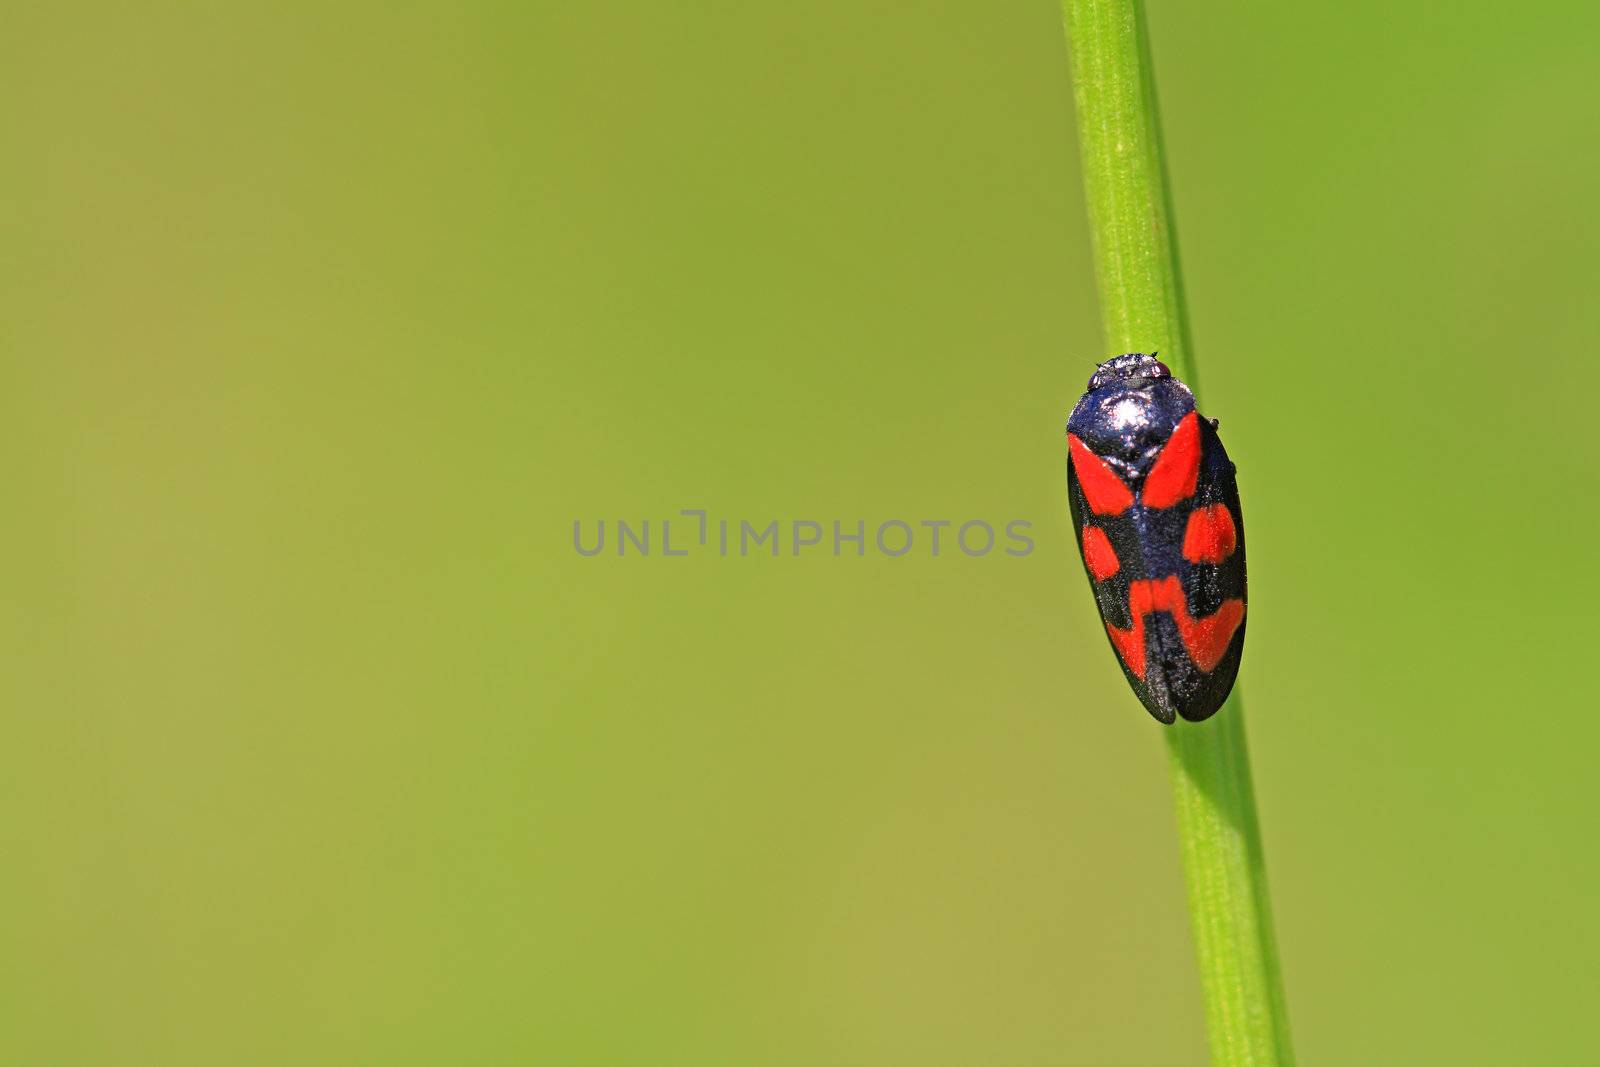 red bug on green background by basel101658